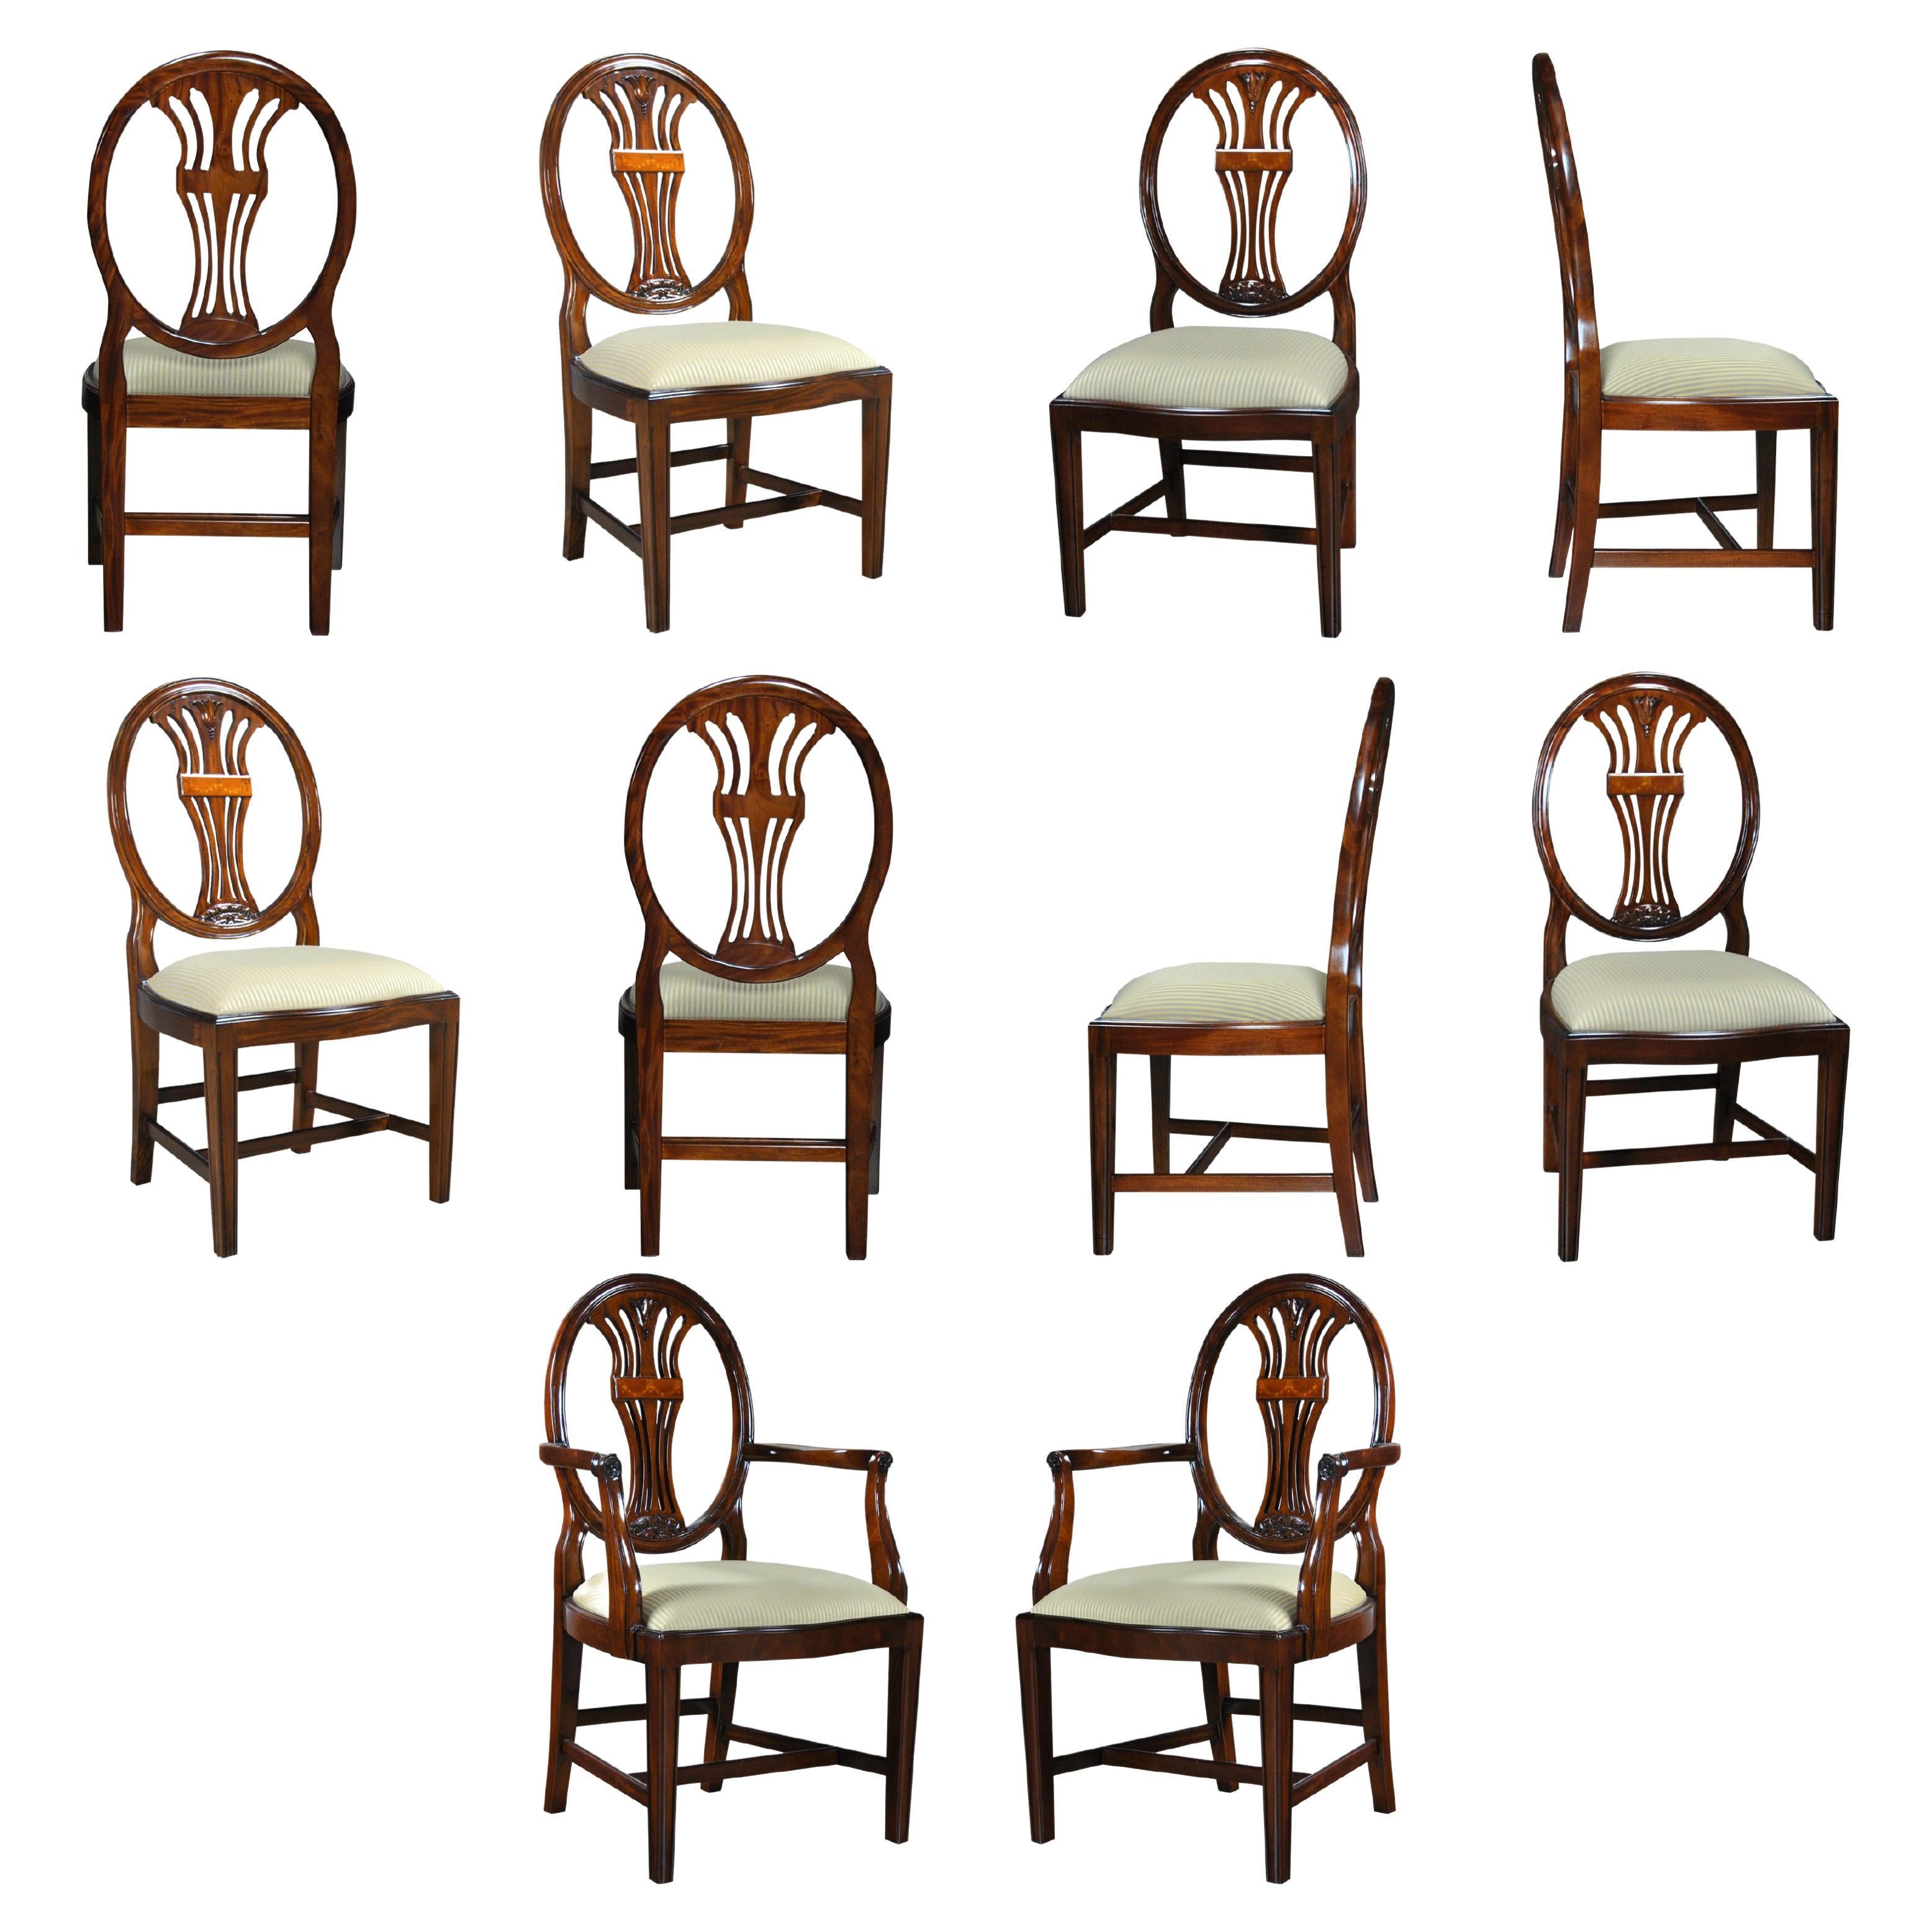 Oval Back Inlaid Chairs, Set of 10 For Sale